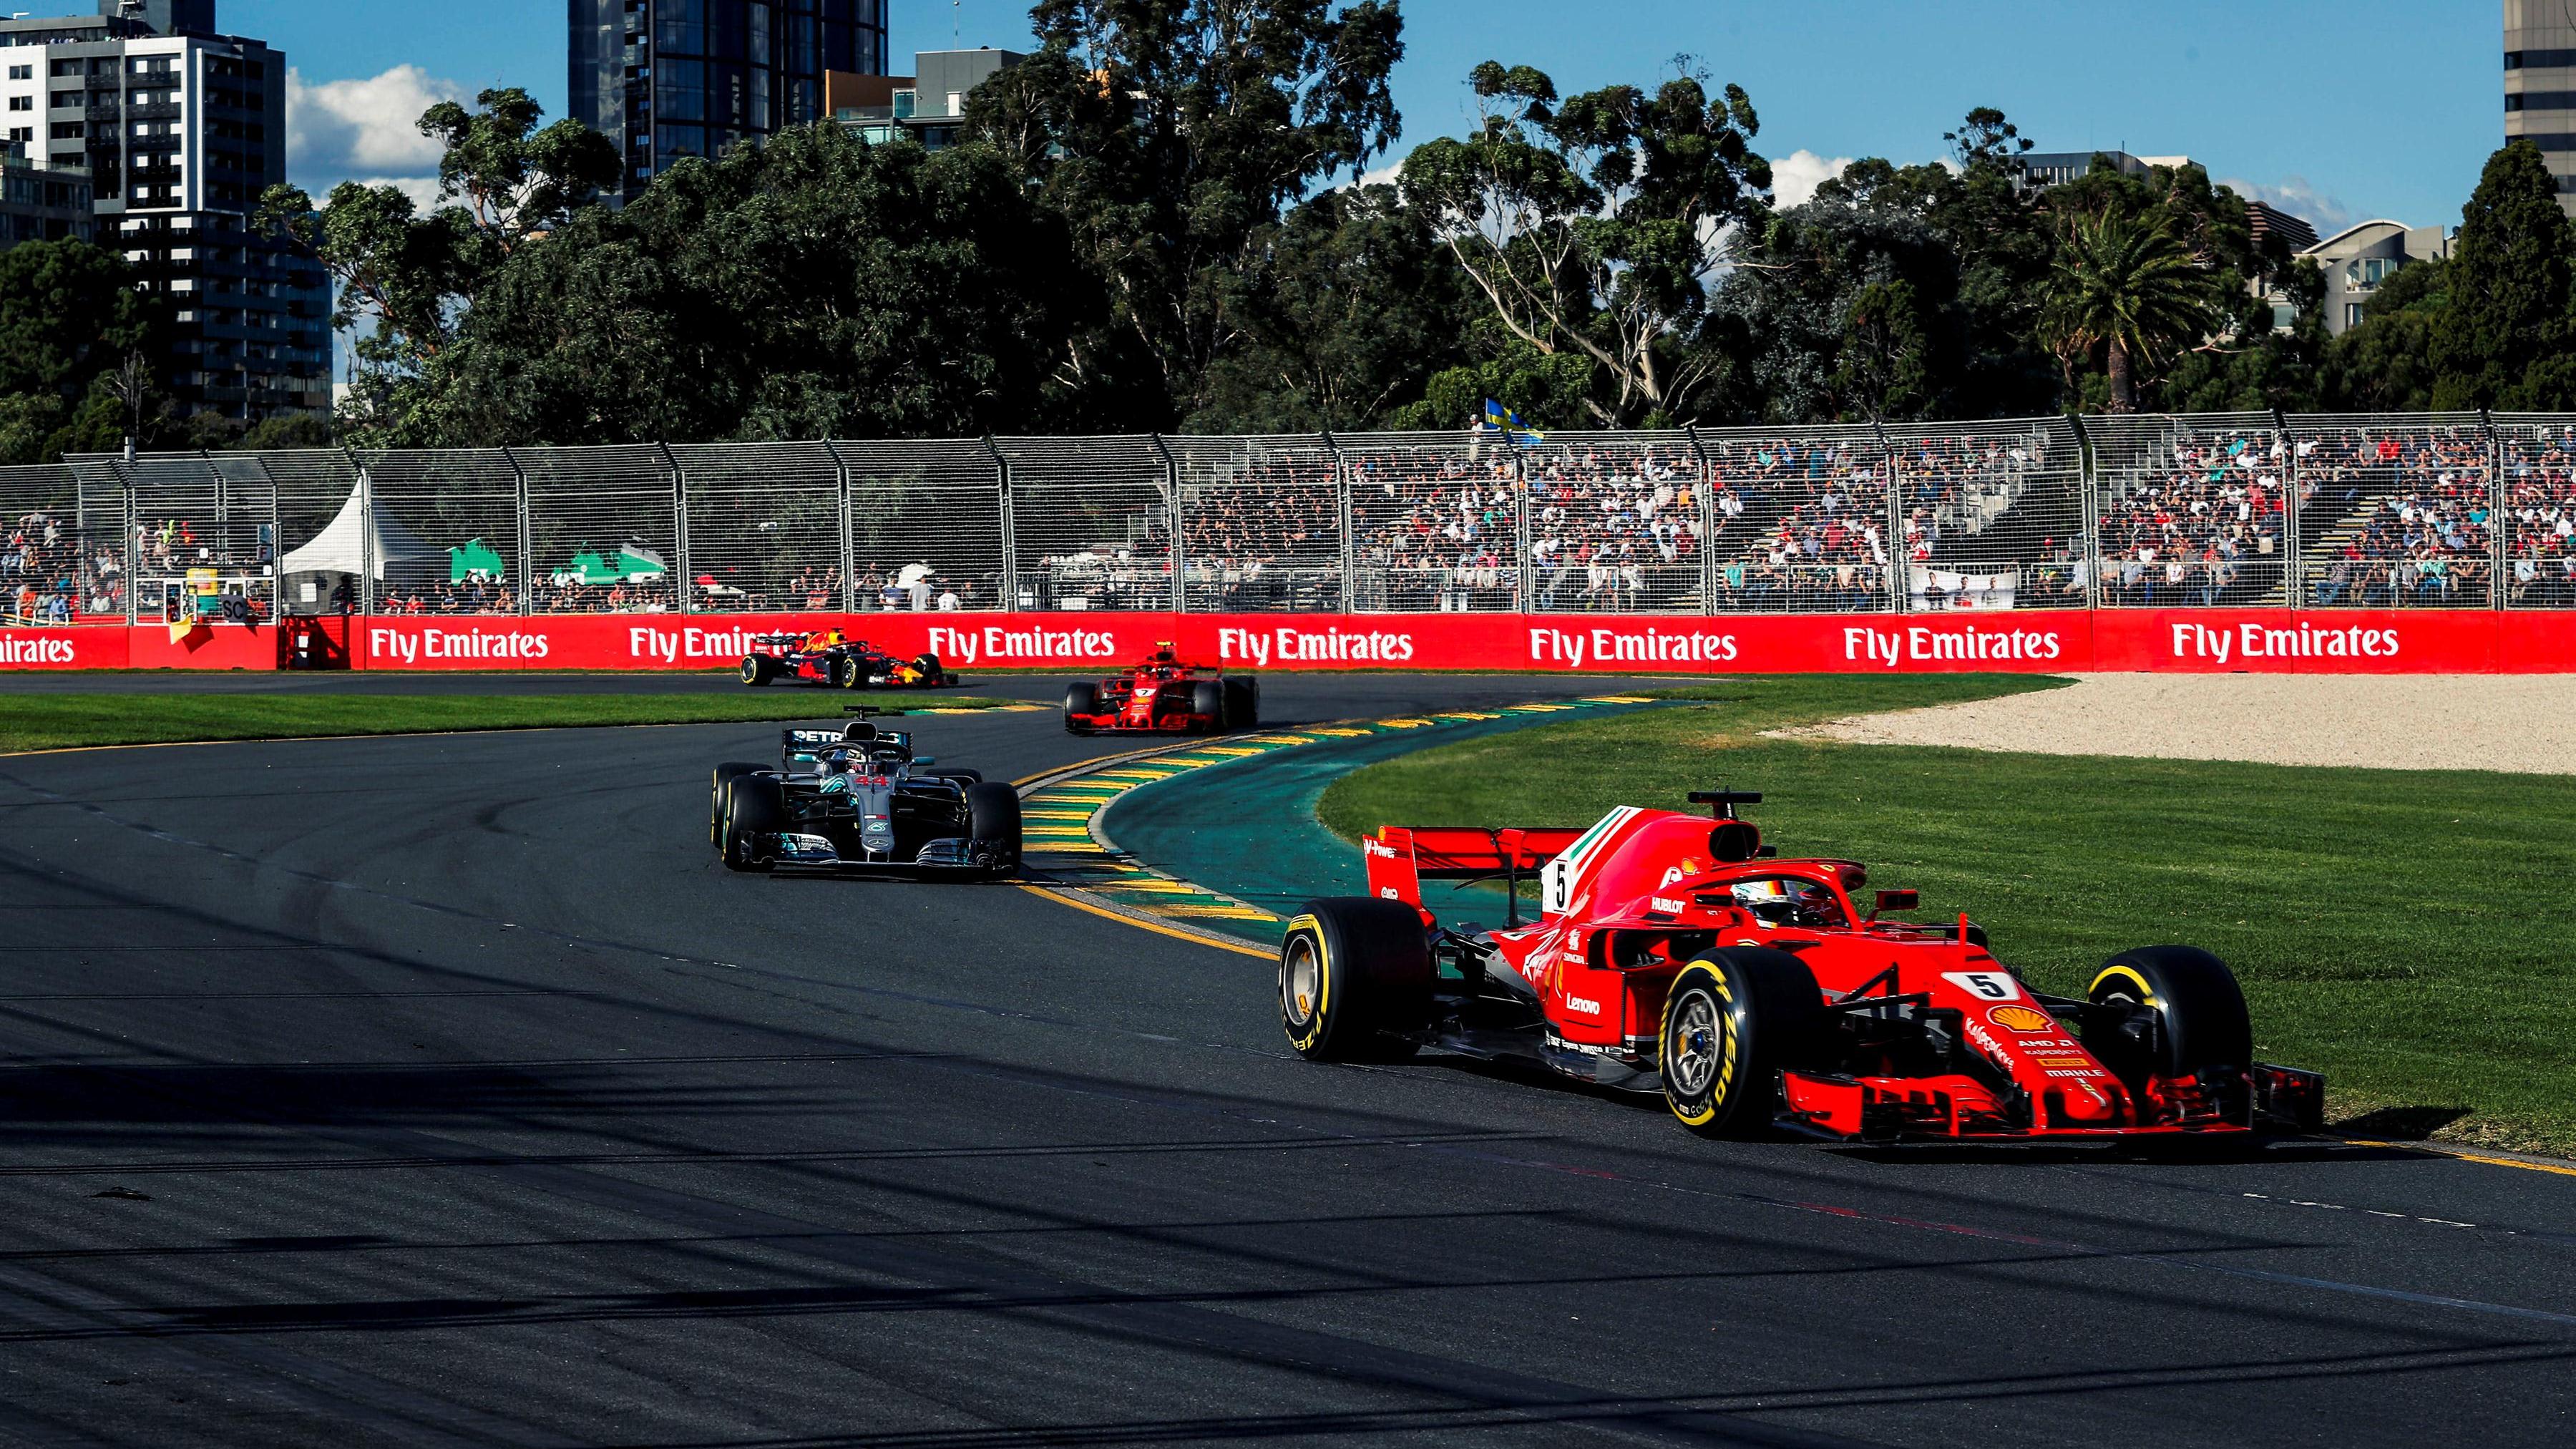 Australian Grand Prix form guide for 2019: Who are the race favourites this year? | Formula